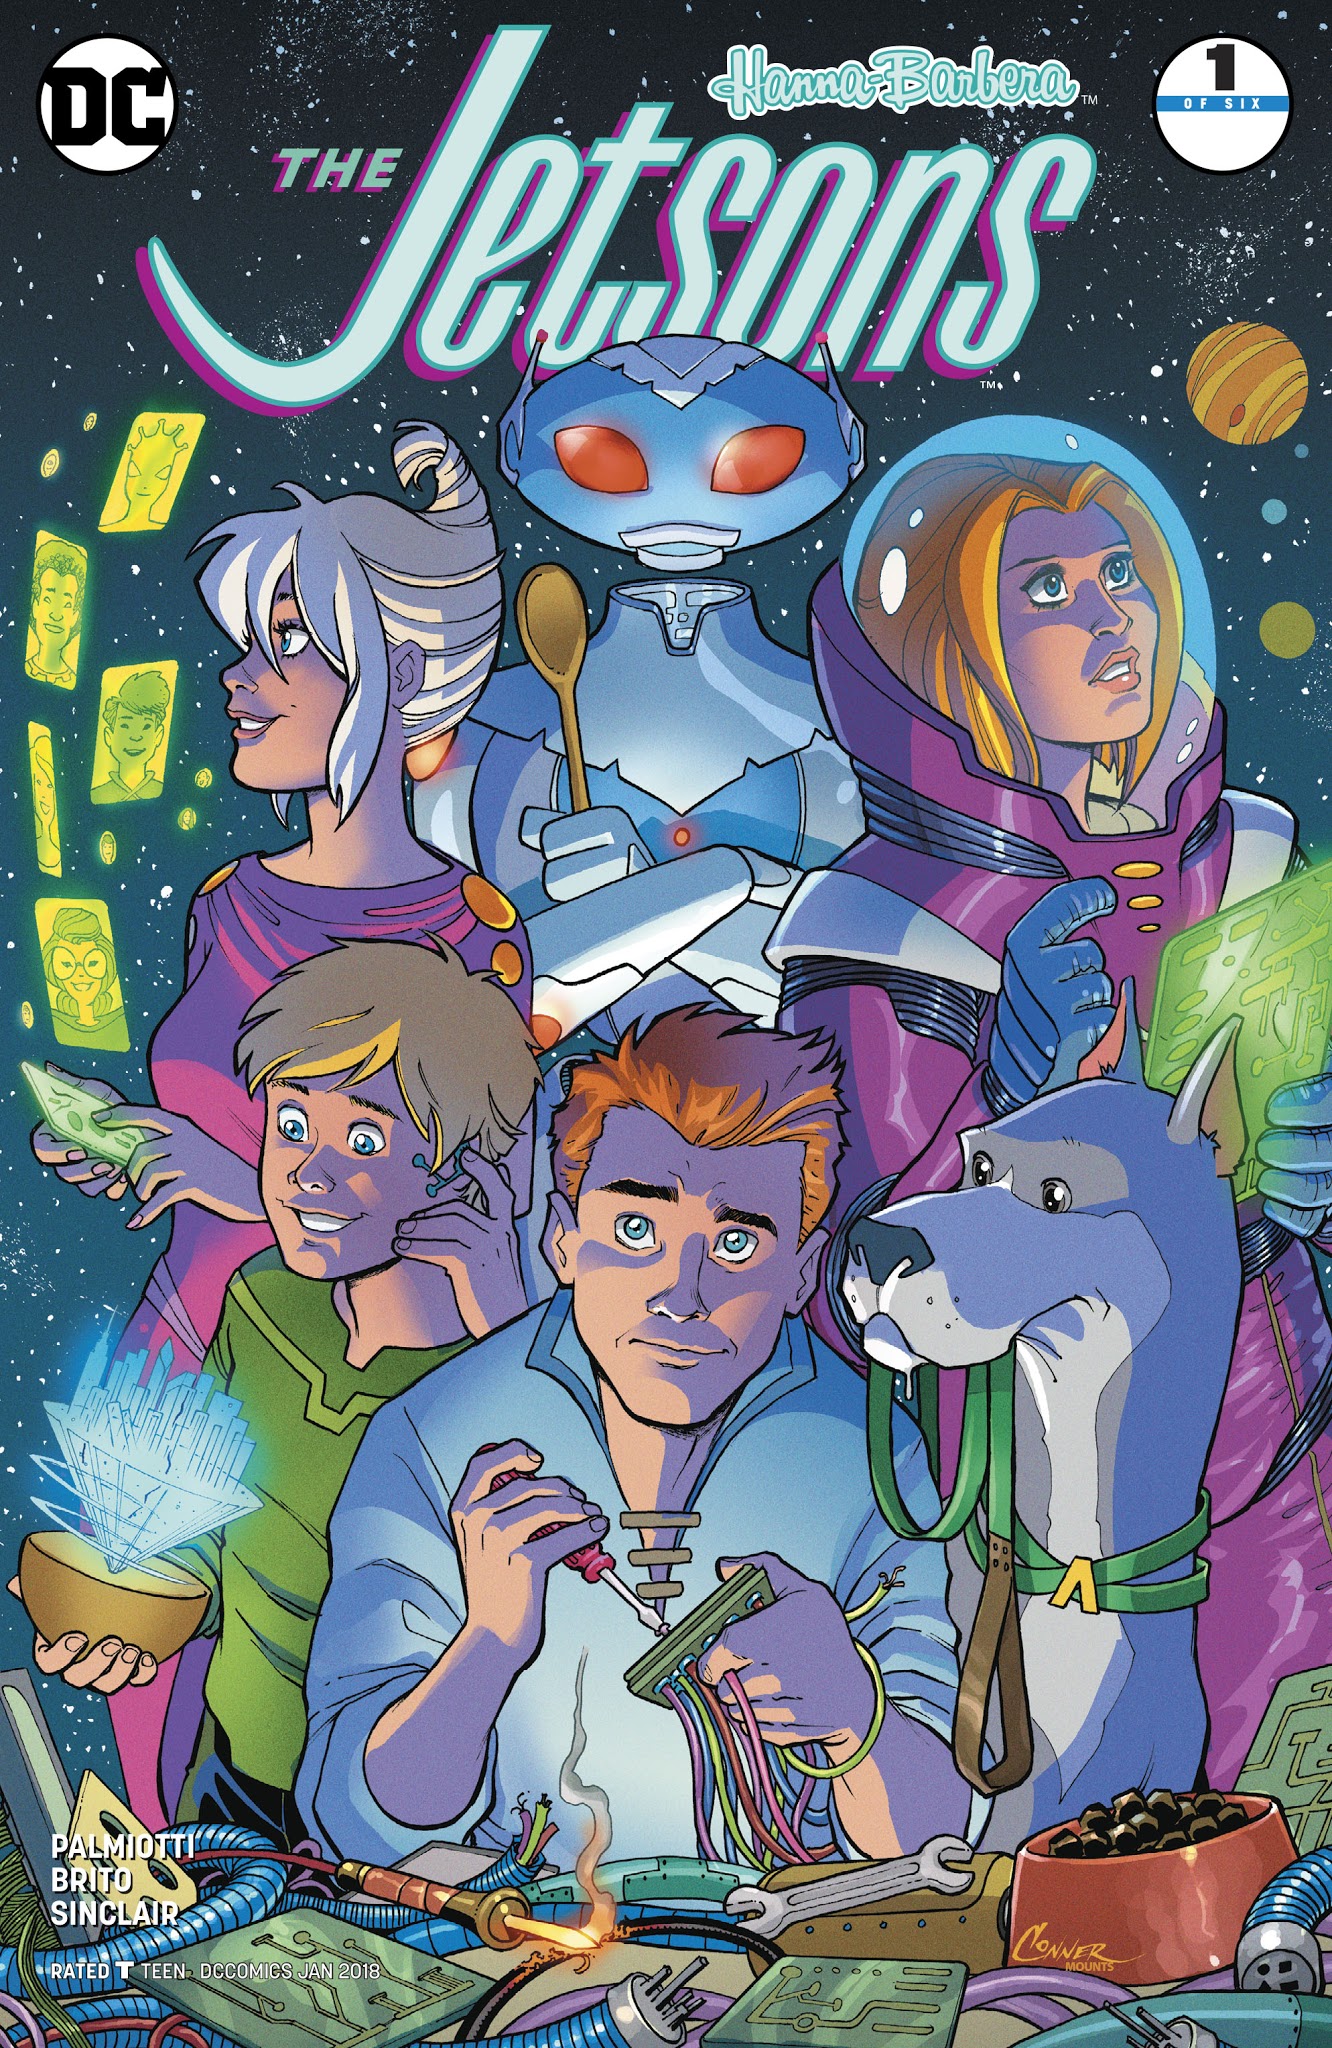 Read online The Jetson comic -  Issue #1 - 1